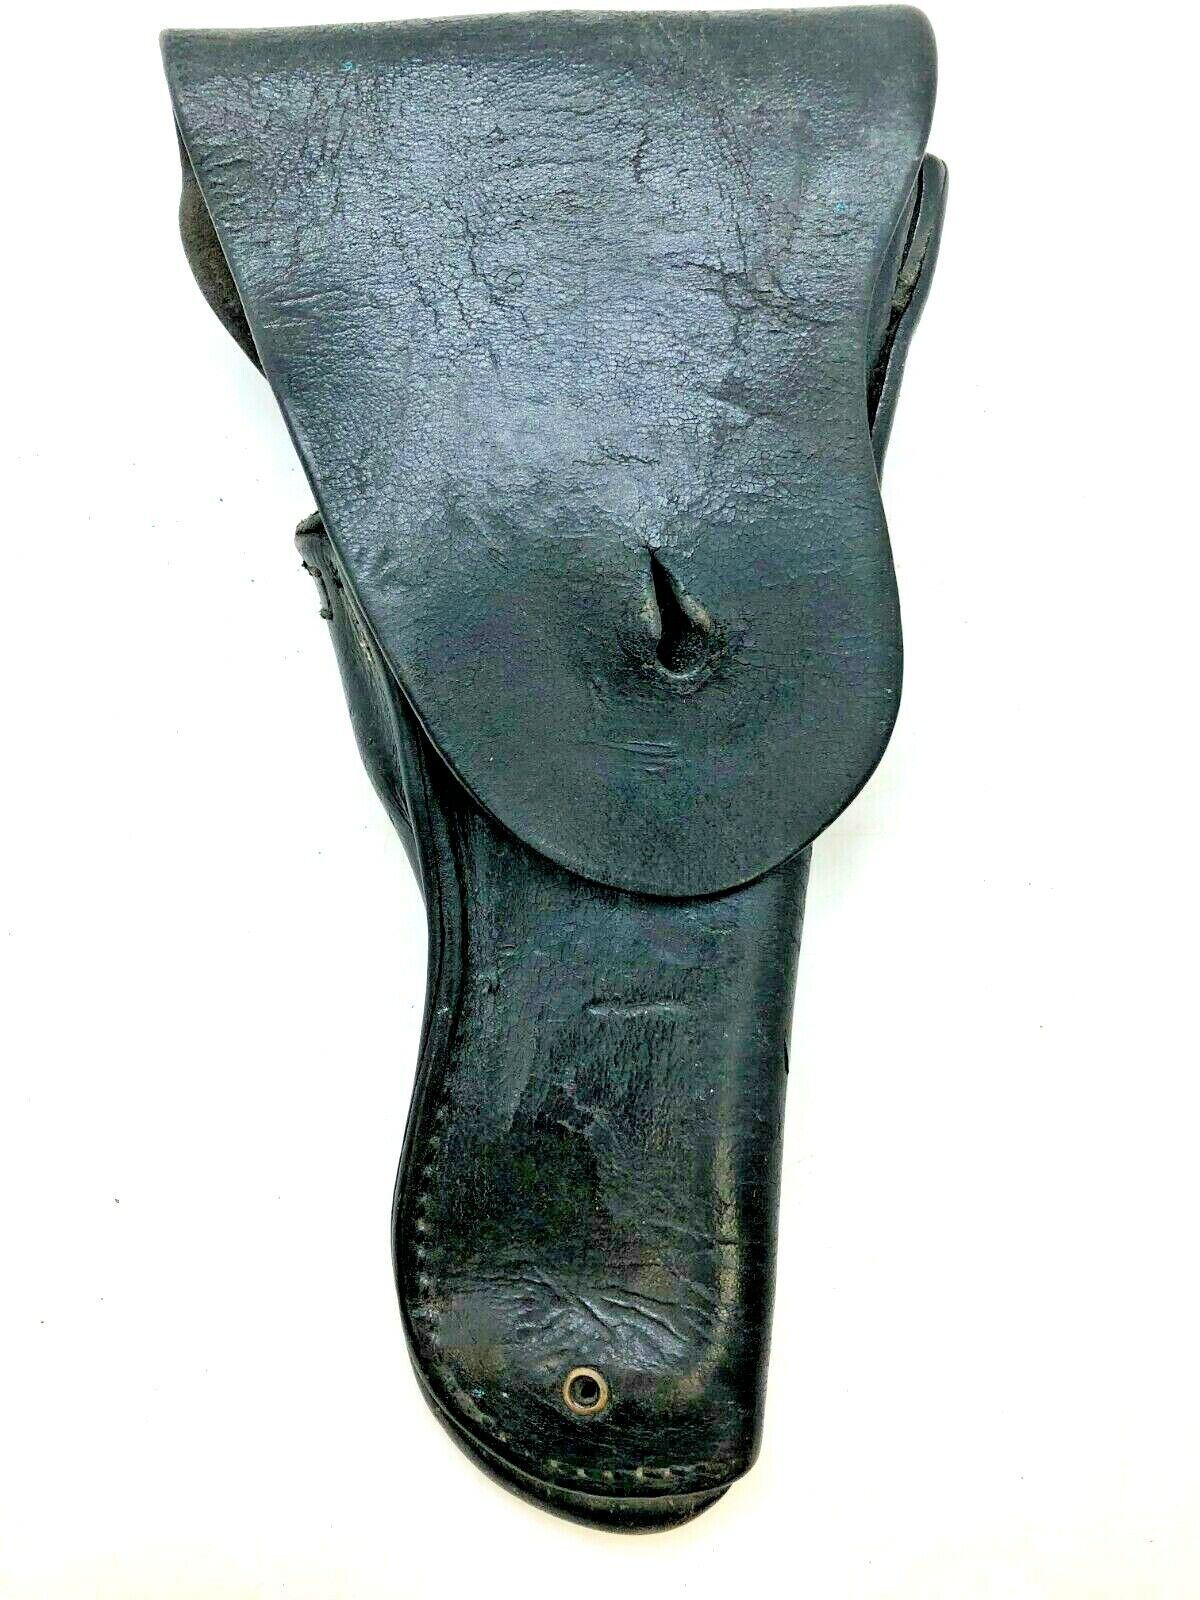 Rare WW2 M-1916 Holster for M-1911 - Used in WW2 / Korean War